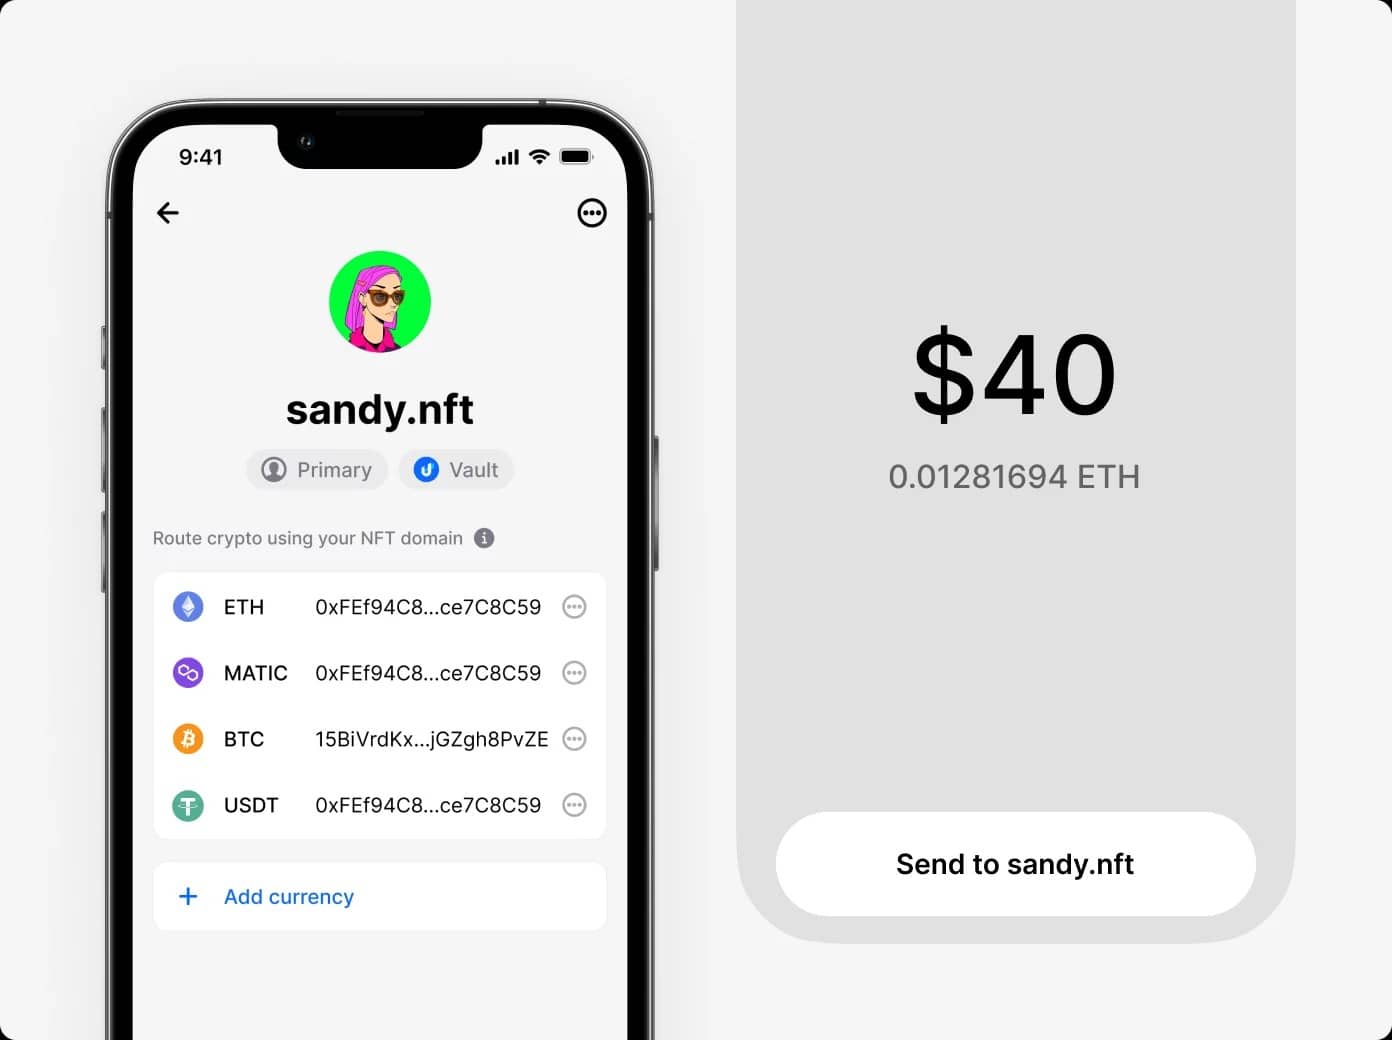 The domain name sandy.nft used to easily receive cryptocurrencies